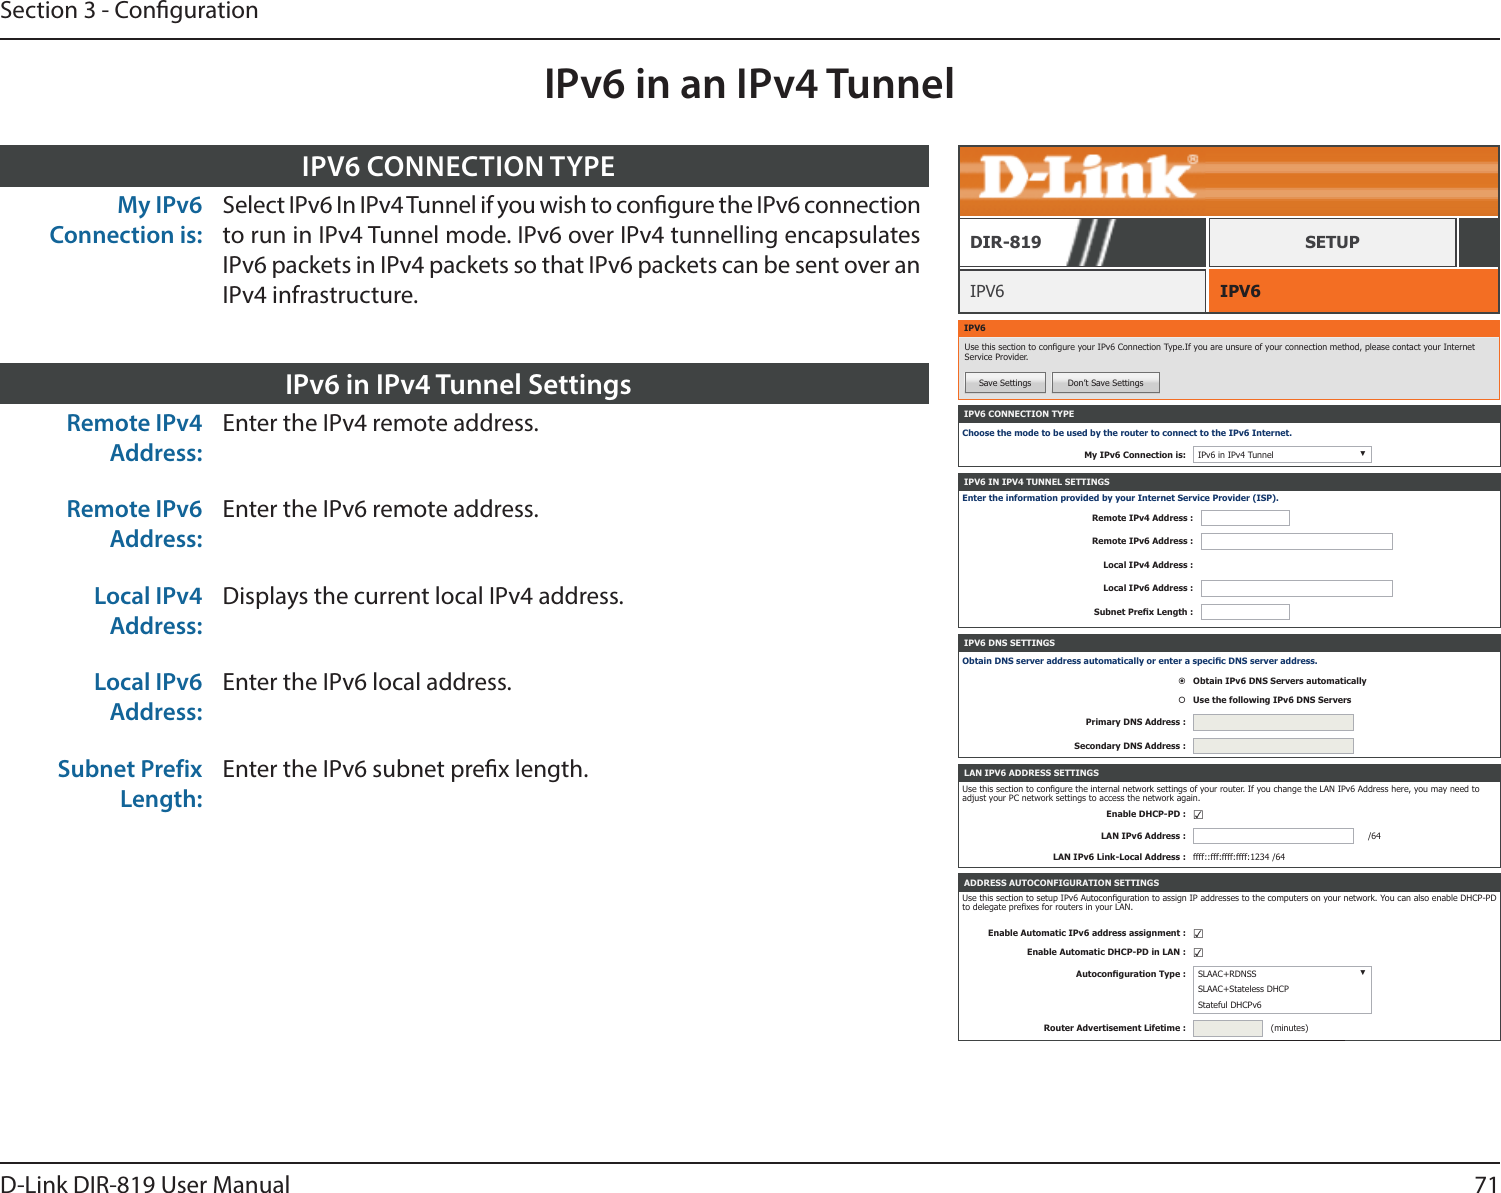 71D-Link DIR-819 User ManualSection 3 - CongurationIPv6 in an IPv4 TunnelIPV6 CONNECTION TYPEChoose the mode to be used by the router to connect to the IPv6 Internet.My IPv6 Connection is: IPv6 in IPv4 Tunnel ▼IPV6 IPV6DIR-819 SETUPIPV6Use this section to congure your IPv6 Connection Type.If you are unsure of your connection method, please contact your Internet Service Provider.Save Settings Don’t Save SettingsIPV6 IN IPV4 TUNNEL SETTINGSEnter the information provided by your Internet Service Provider (ISP).Remote IPv4 Address :Remote IPv6 Address :Local IPv4 Address :Local IPv6 Address :Subnet Prex Length :IPV6 DNS SETTINGSObtain DNS server address automatically or enter a specic DNS server address.Obtain IPv6 DNS Servers automaticallyUse the following IPv6 DNS ServersPrimary DNS Address :Secondary DNS Address :ADDRESS AUTOCONFIGURATION SETTINGSUse this section to setup IPv6 Autoconguration to assign IP addresses to the computers on your network. You can also enable DHCP-PD to delegate prexes for routers in your LAN.Enable Automatic IPv6 address assignment : ☑Enable Automatic DHCP-PD in LAN : ☑Autoconguration Type : SLAAC+RDNSS ▼SLAAC+Stateless DHCPStateful DHCPv6Router Advertisement Lifetime : (minutes)LAN IPV6 ADDRESS SETTINGSUse this section to congure the internal network settings of your router. If you change the LAN IPv6 Address here, you may need to adjust your PC network settings to access the network again.Enable DHCP-PD : ☑LAN IPv6 Address : /64LAN IPv6 Link-Local Address : ffff::fff:ffff:ffff:1234 /64My IPv6 Connection is:Select IPv6 In IPv4 Tunnel if you wish to congure the IPv6 connection to run in IPv4 Tunnel mode. IPv6 over IPv4 tunnelling encapsulates IPv6 packets in IPv4 packets so that IPv6 packets can be sent over an IPv4 infrastructure.IPV6 CONNECTION TYPERemote IPv4 Address:Enter the IPv4 remote address.Remote IPv6 Address:Enter the IPv6 remote address.Local IPv4 Address:Displays the current local IPv4 address.Local IPv6 Address:Enter the IPv6 local address.Subnet Prefix Length:Enter the IPv6 subnet prex length.IPv6 in IPv4 Tunnel Settings